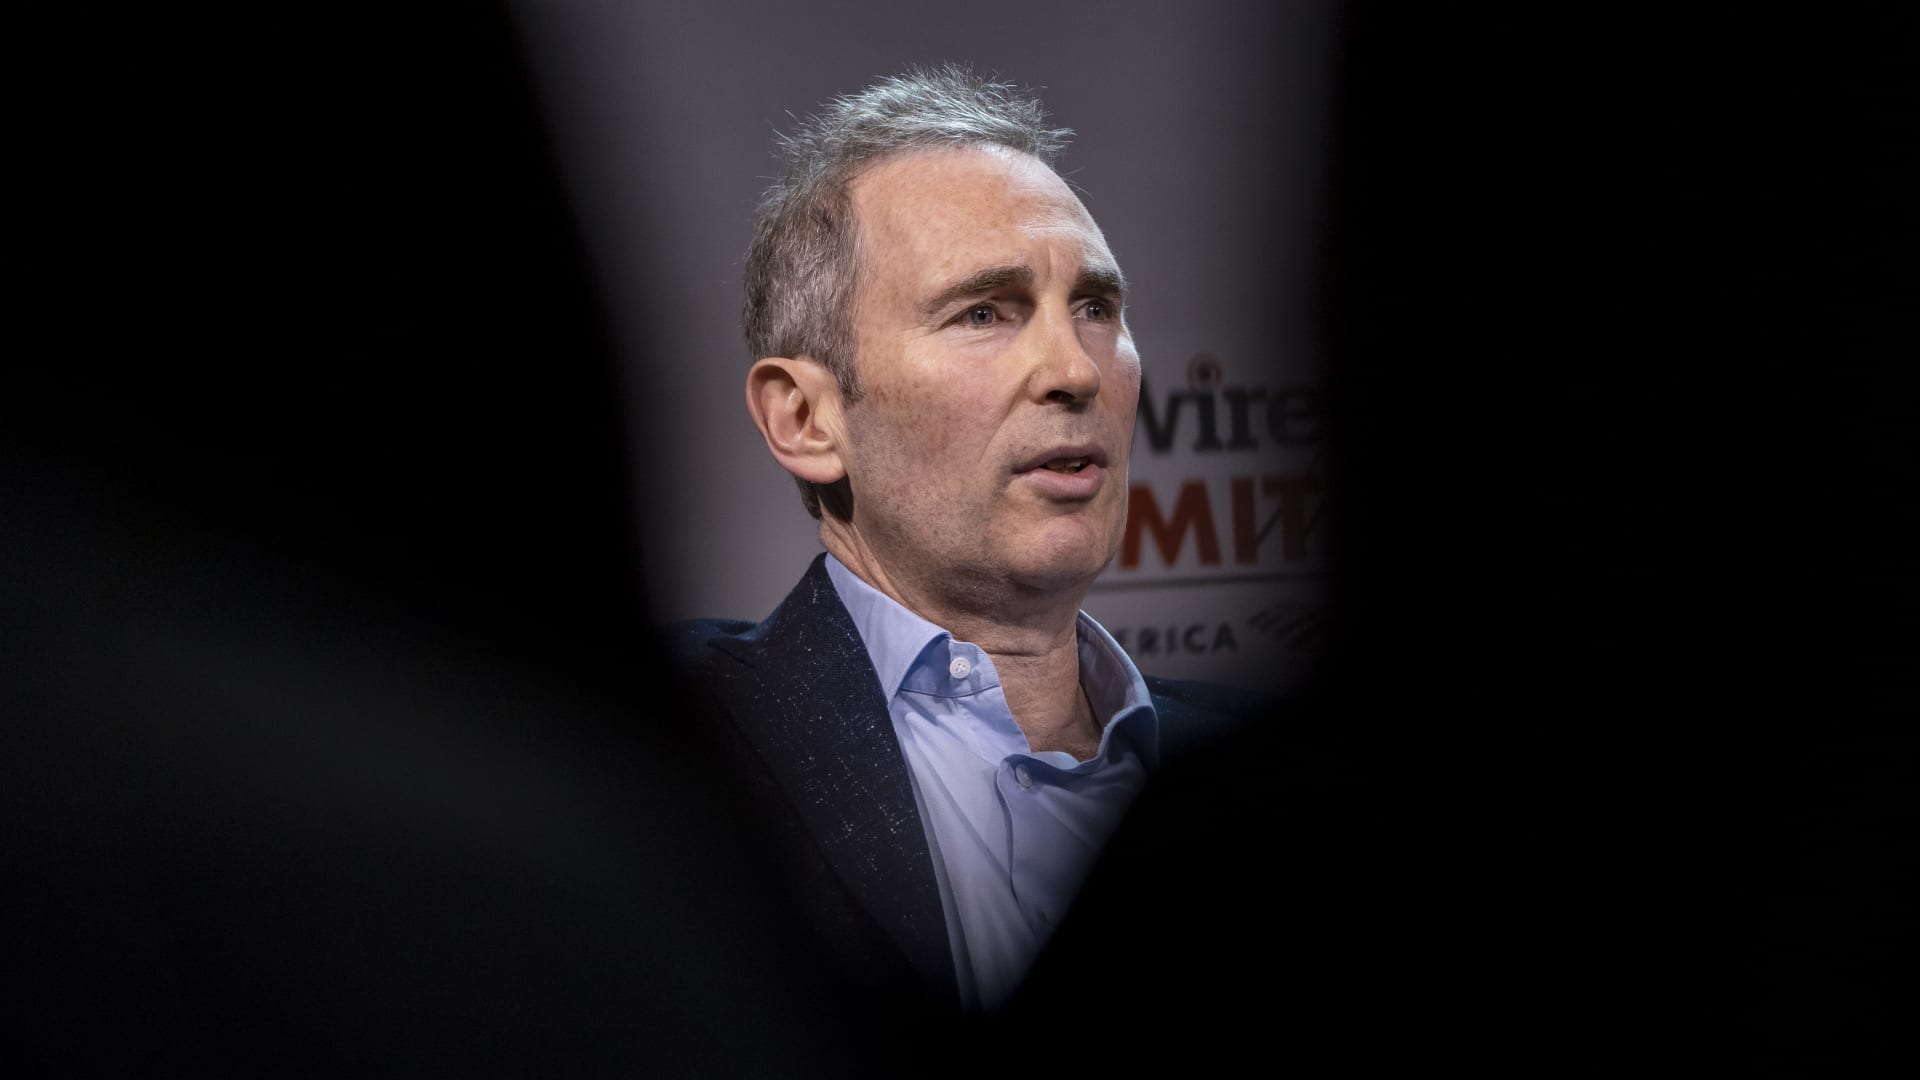 Amazon CEO Andy Jassy broke federal labor law with anti-union remarks